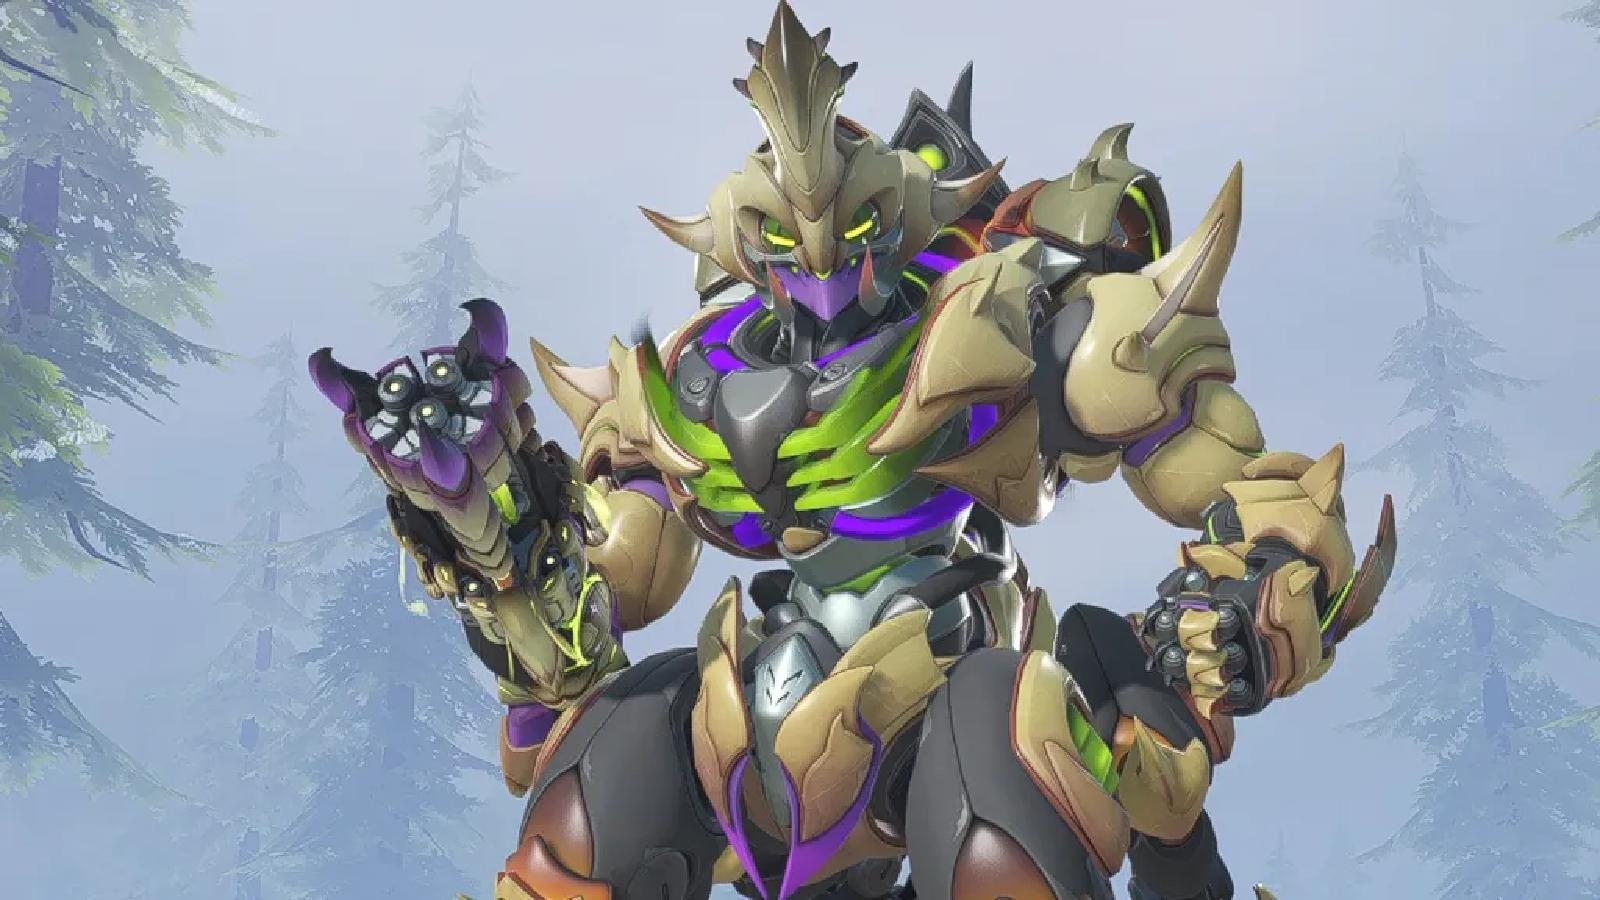 Overwatch 2 dev reveals future changes to Mythic skins after player backlash